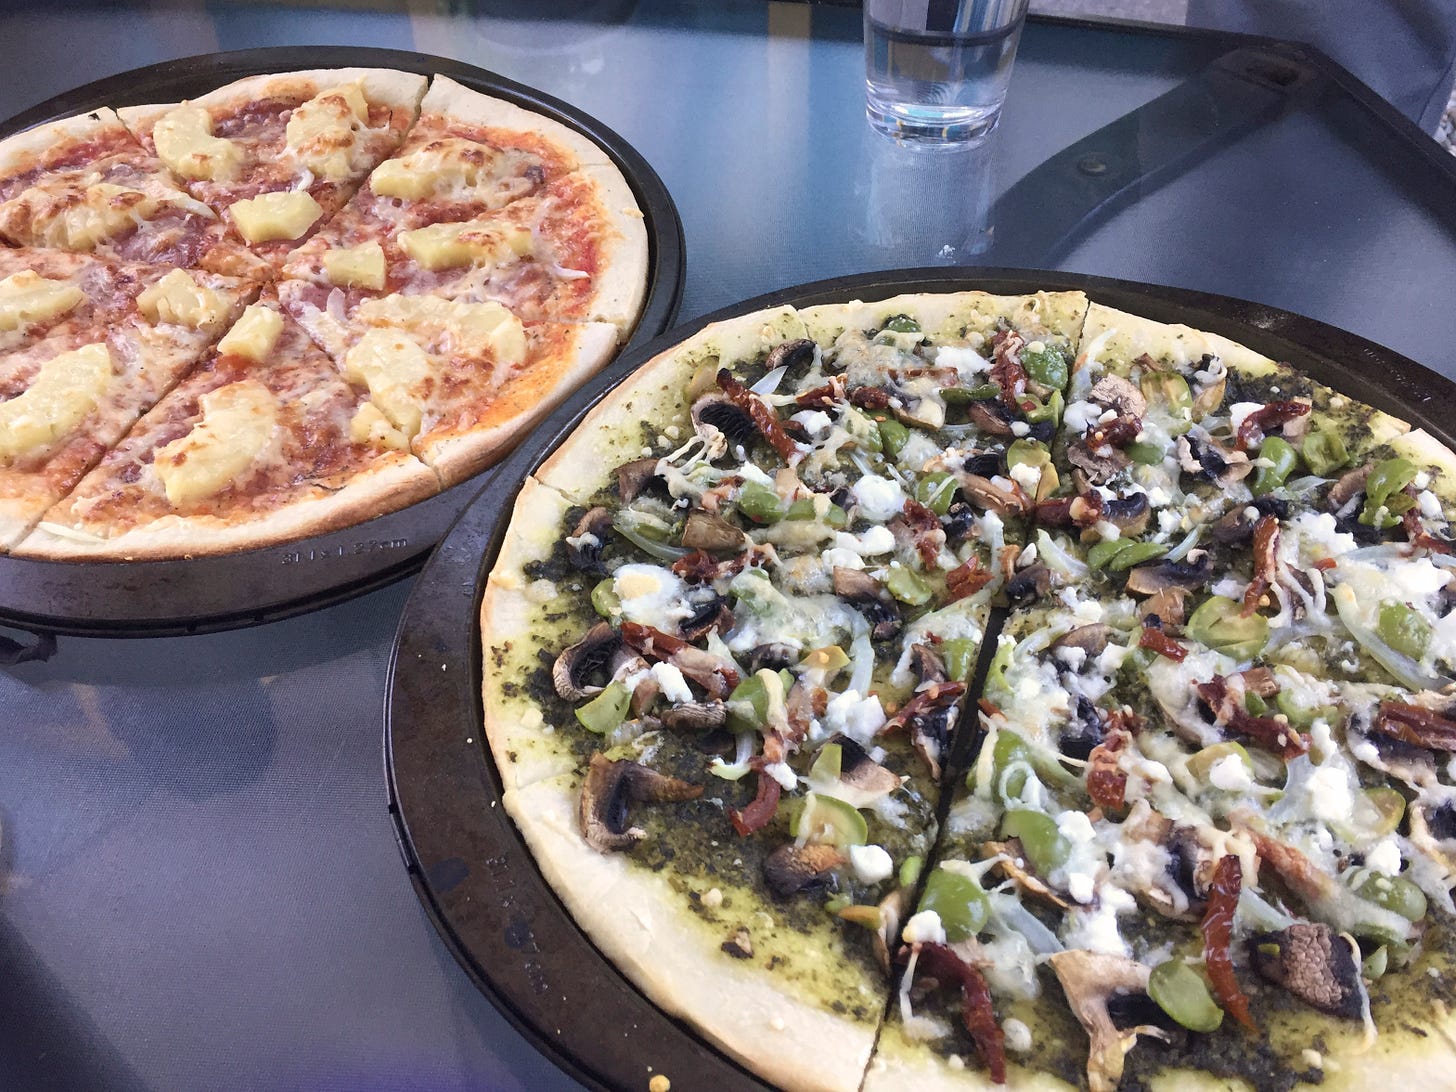 Two pizzas in their pans. In the background, a red sauce pizza with salami and pineapple. In the foreground, a pesto base with olives, mushrooms, sun-dried tomatoes, and feta.